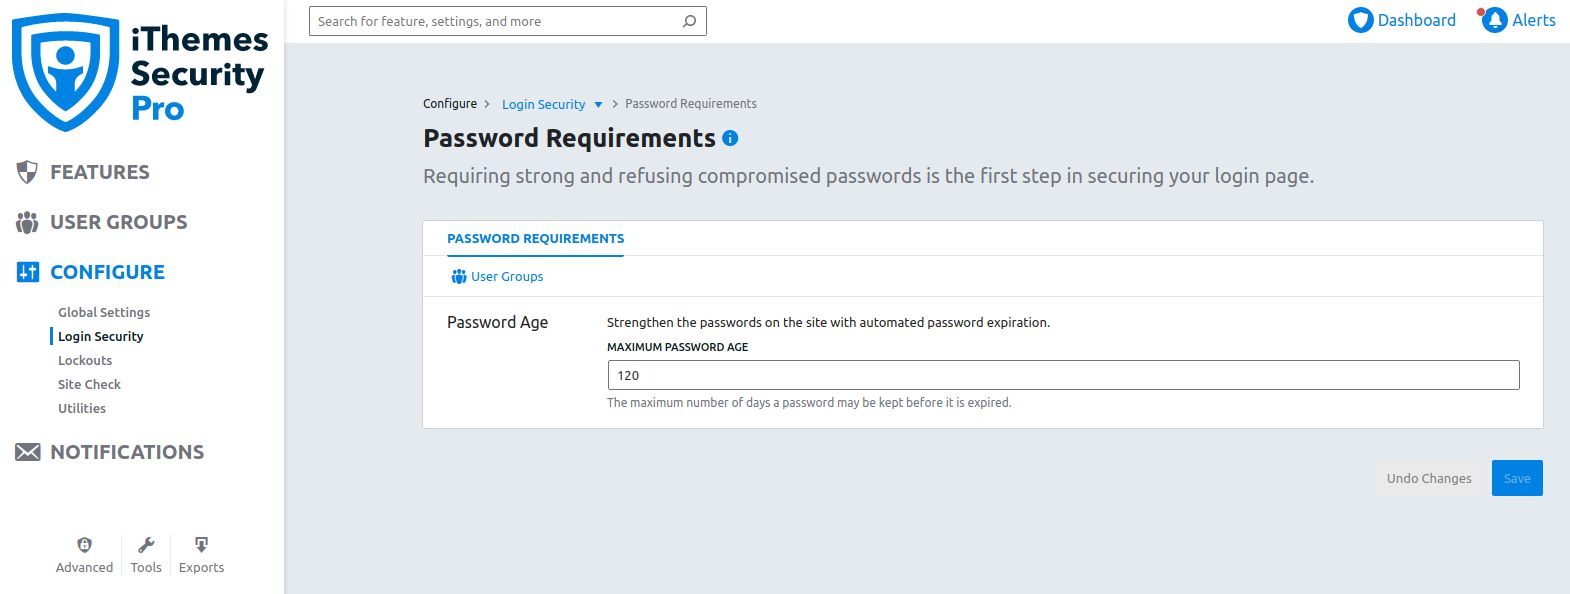 Choose the Configure tab from the plugin’s vertical settings menu and navigate to Login security. Here, you can configure the Password age, which defines the password expiration policy. By default, it is set to 120 days.